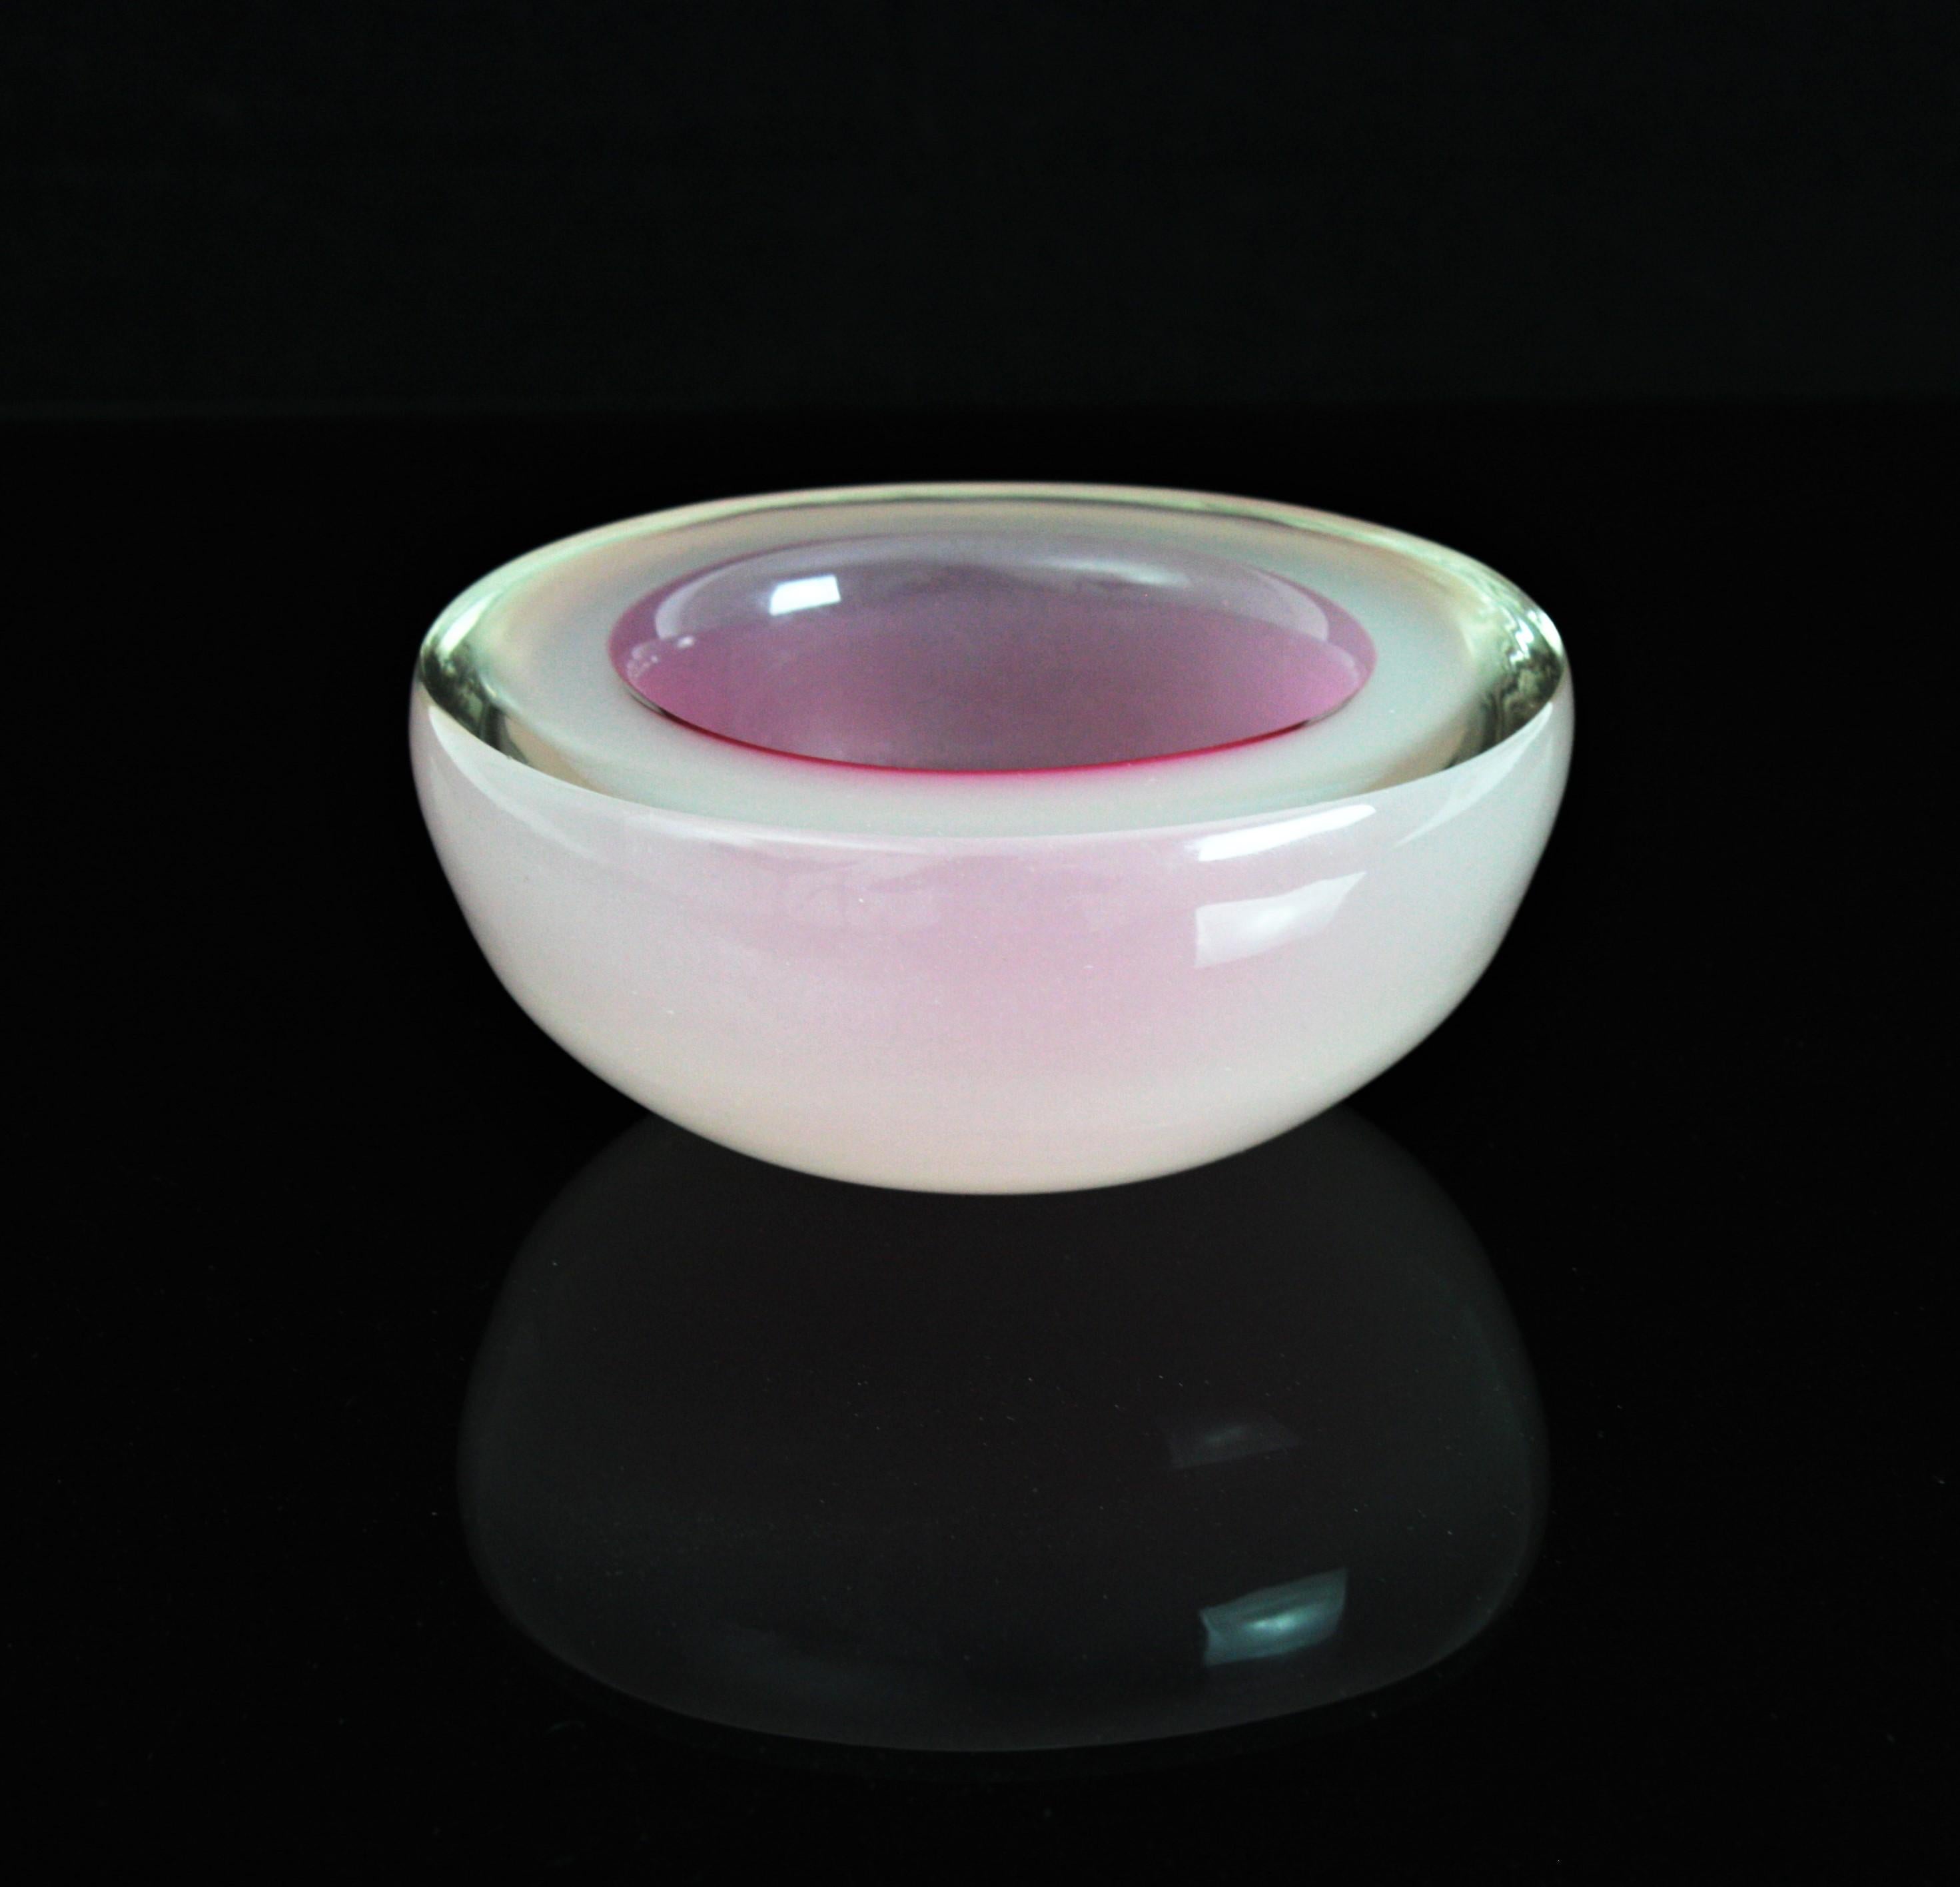 Eye-catching hand blown Sommerso Murano glass opalescent pink and white large oval shaped geode bowl. Archimede Seguso, Italy, 1950s.
Alabastro pink opal white glass cased into clear glass using the Sommerso technique.
Large and heavy. Lovely